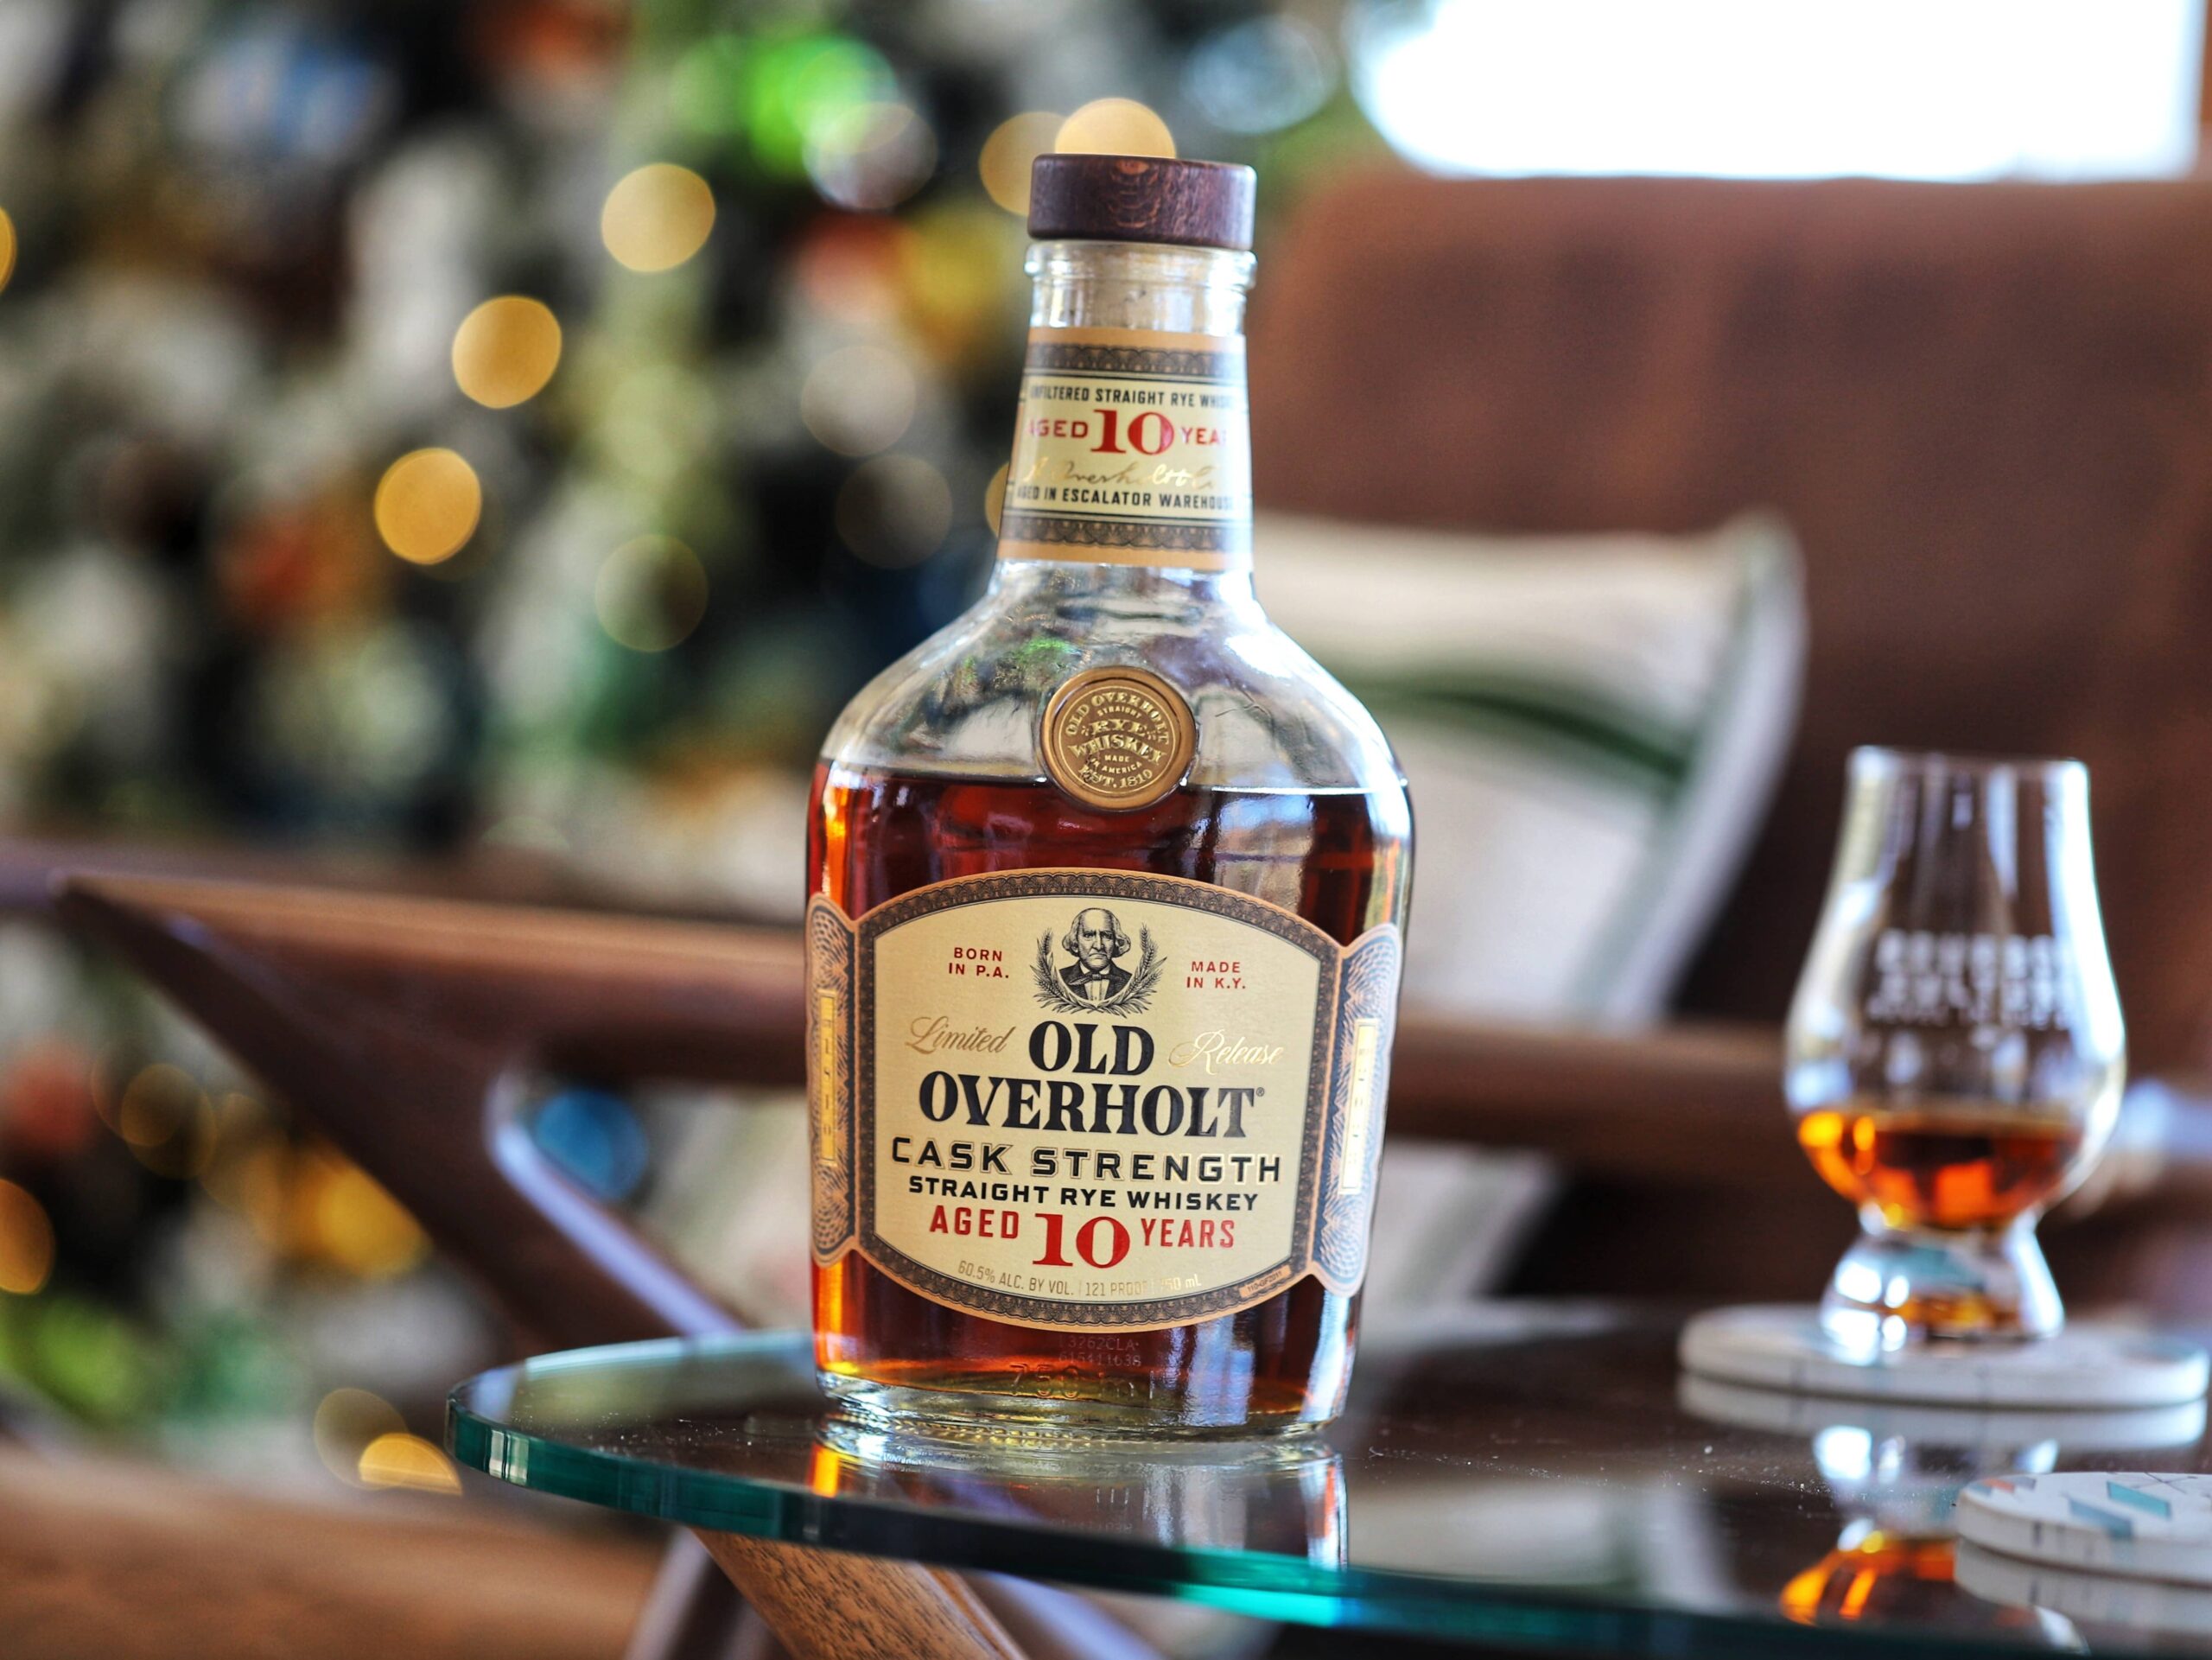 Old Overholt 10 Year Old Cask Strength Rye Whiskey Review